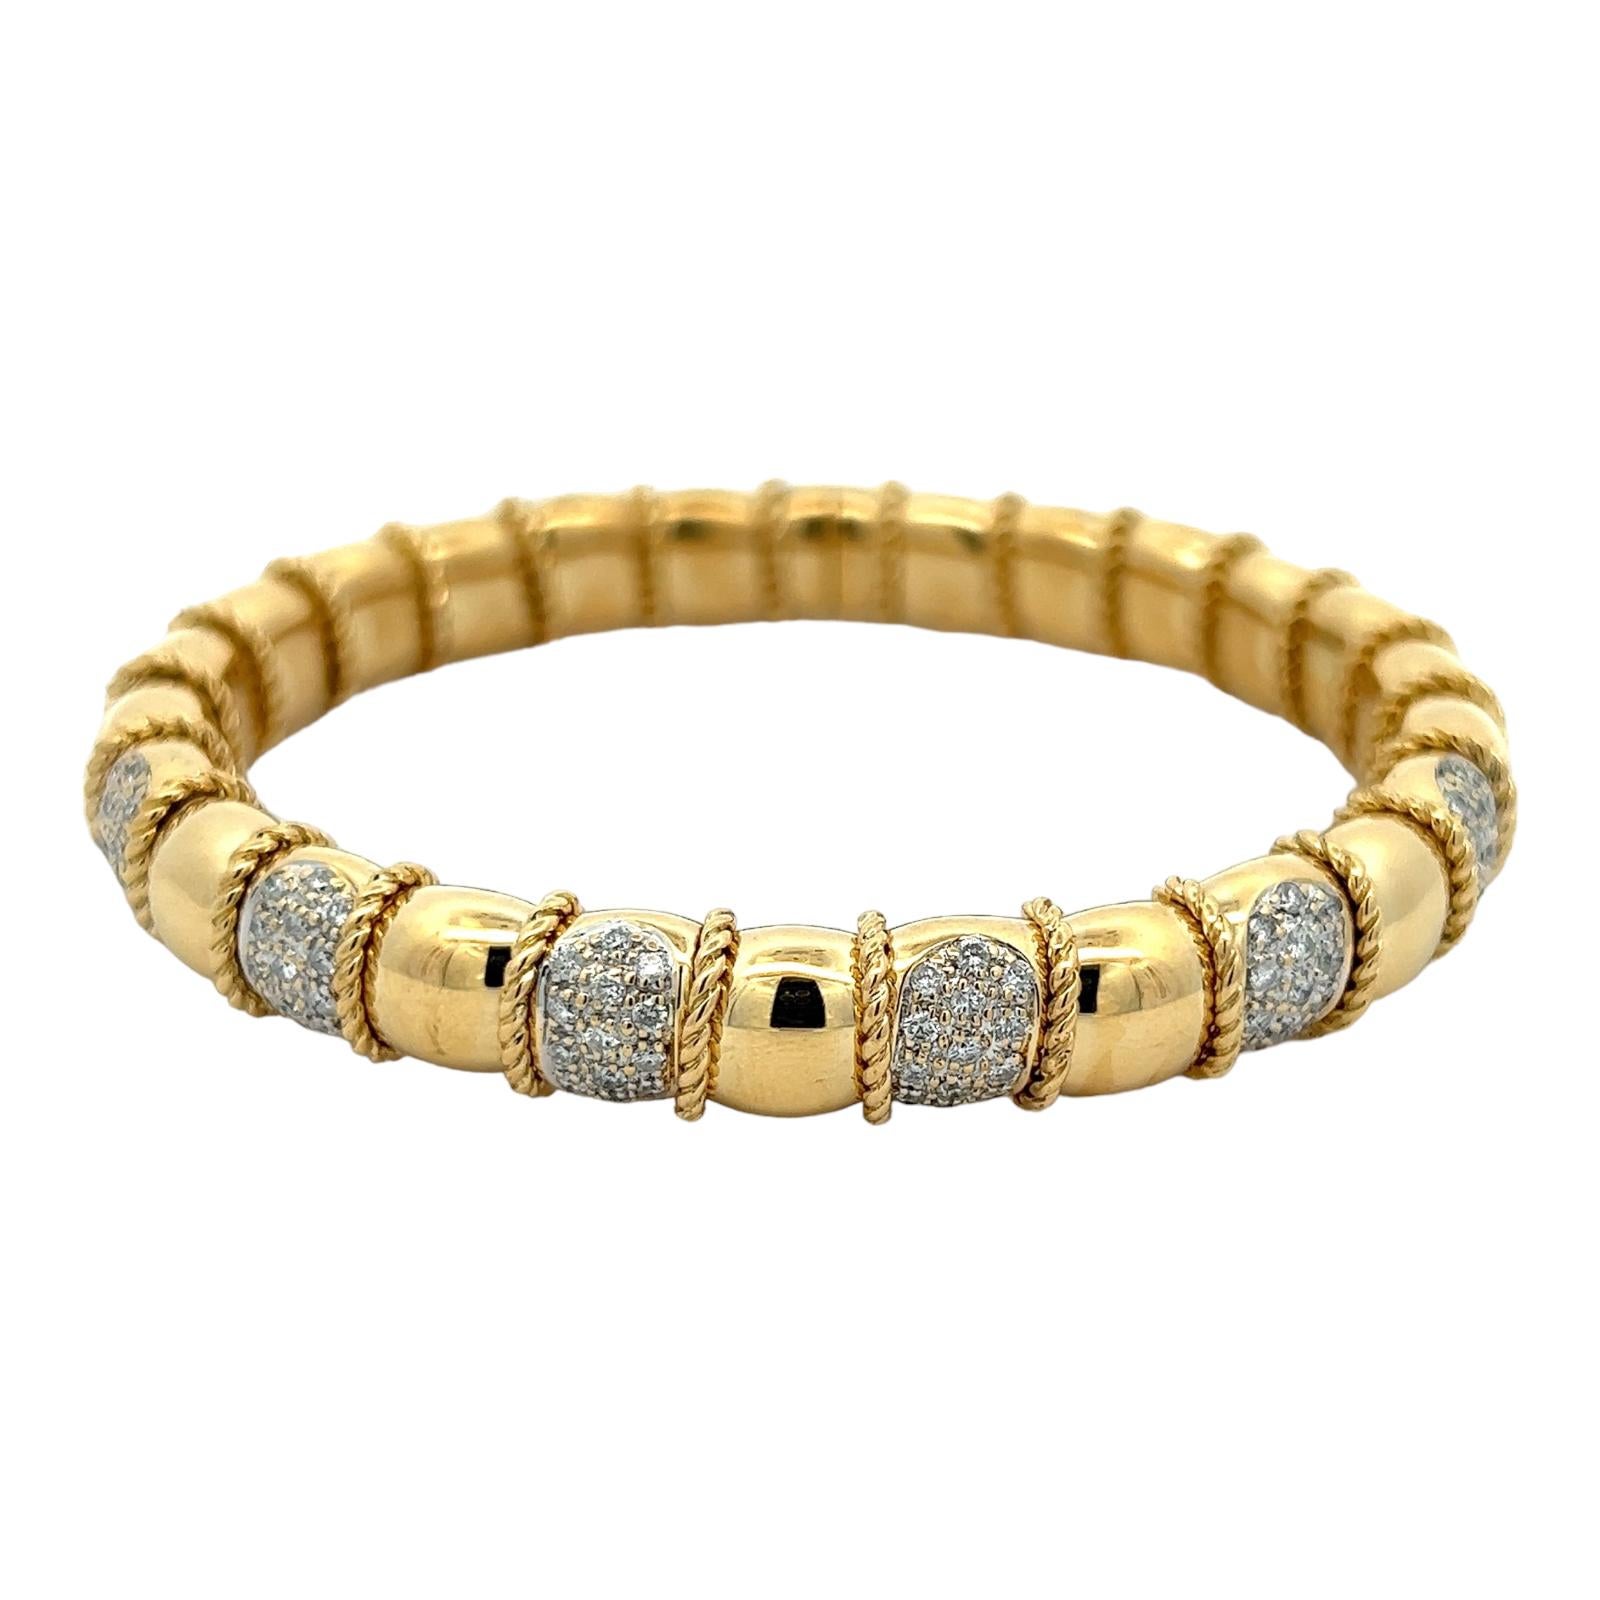 Pavé diamond flexible cuff bracelet crafted in 18 karat yellow gold. The bangle features 78 round brilliant cut diamonds weighing approximately 1.50 CTW and graded H-I color and SI clarity. The cuff is flexible for easy wear and measures 2.25 inches